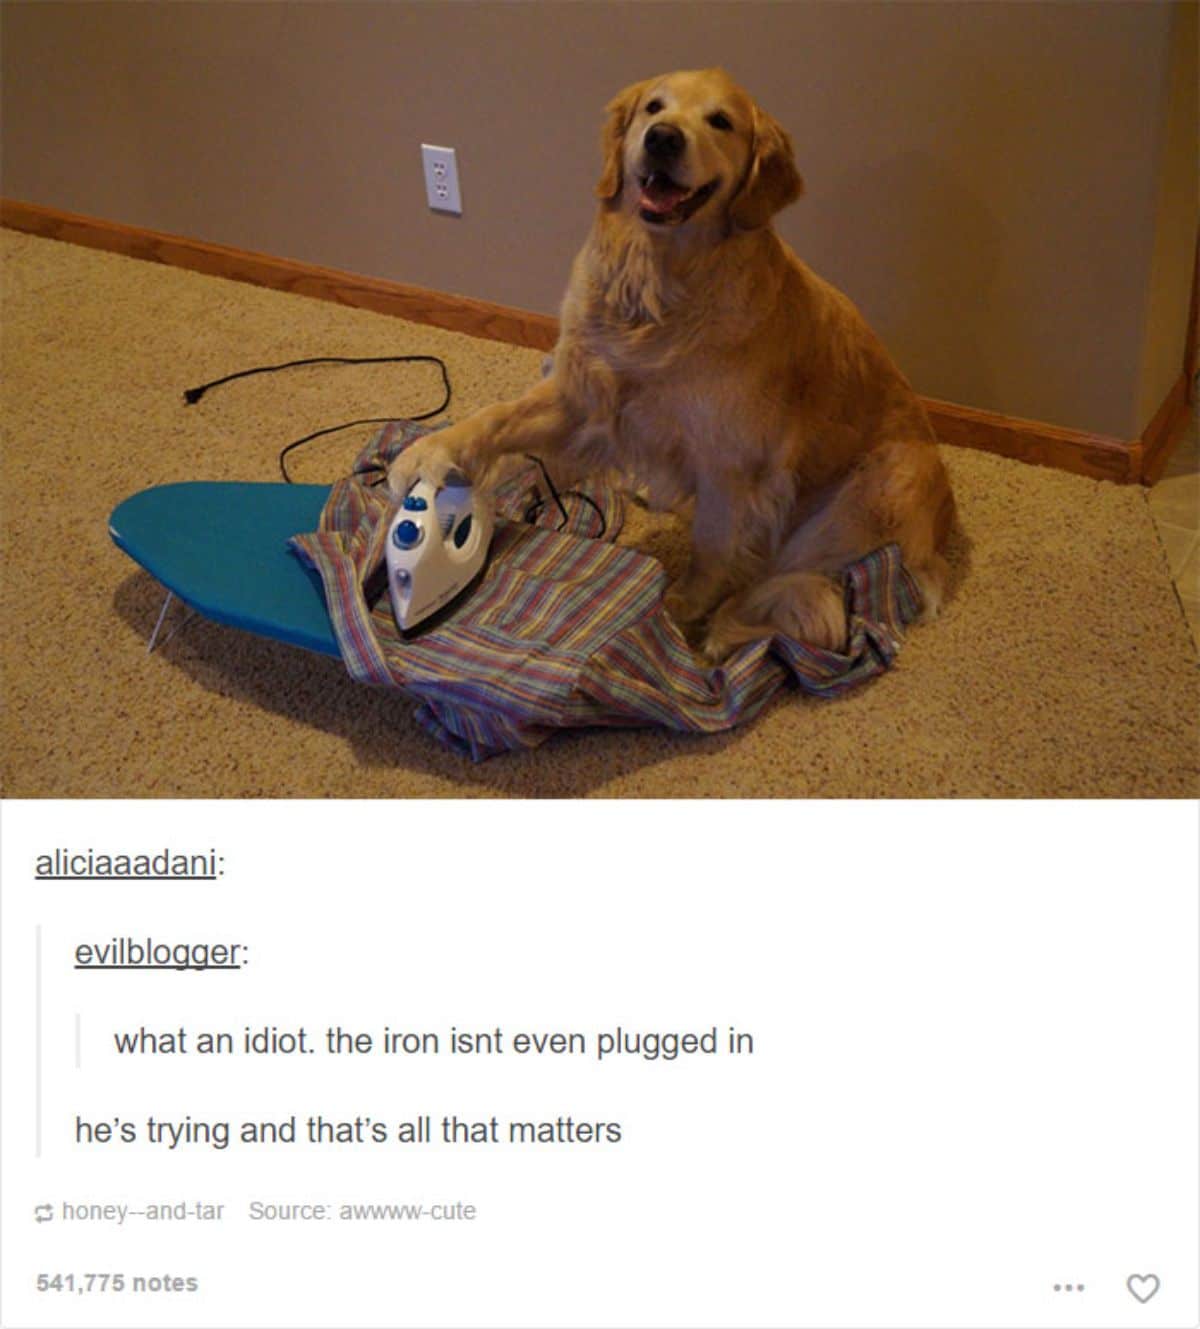 golden retriever putting a paw on an unplugged iron thats on a shirt on a small blue ironing board on the floor